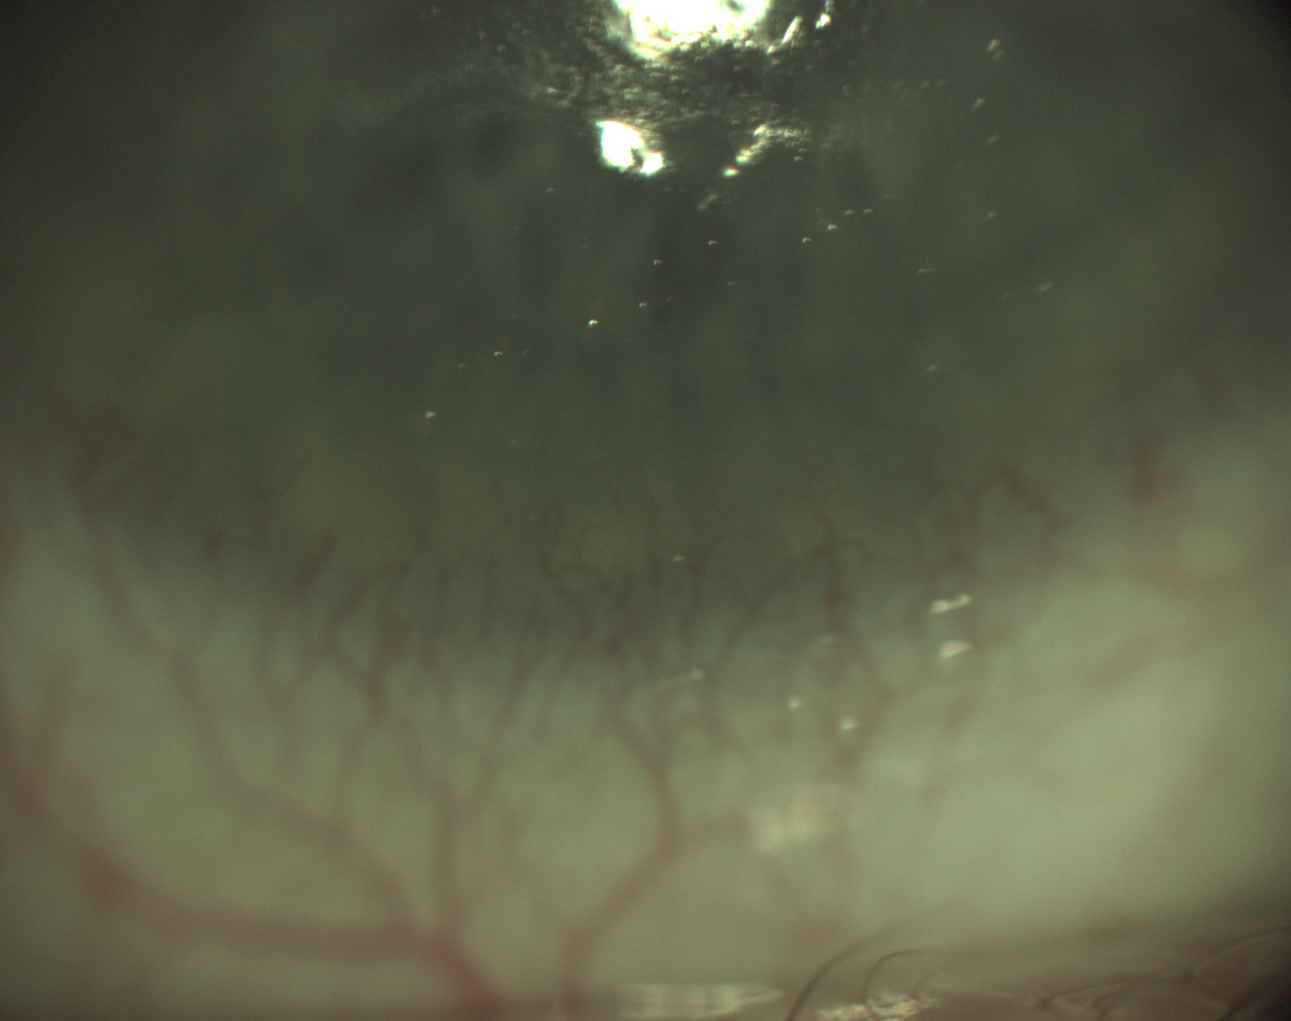 Superior Corneal Staining in Dry Eye